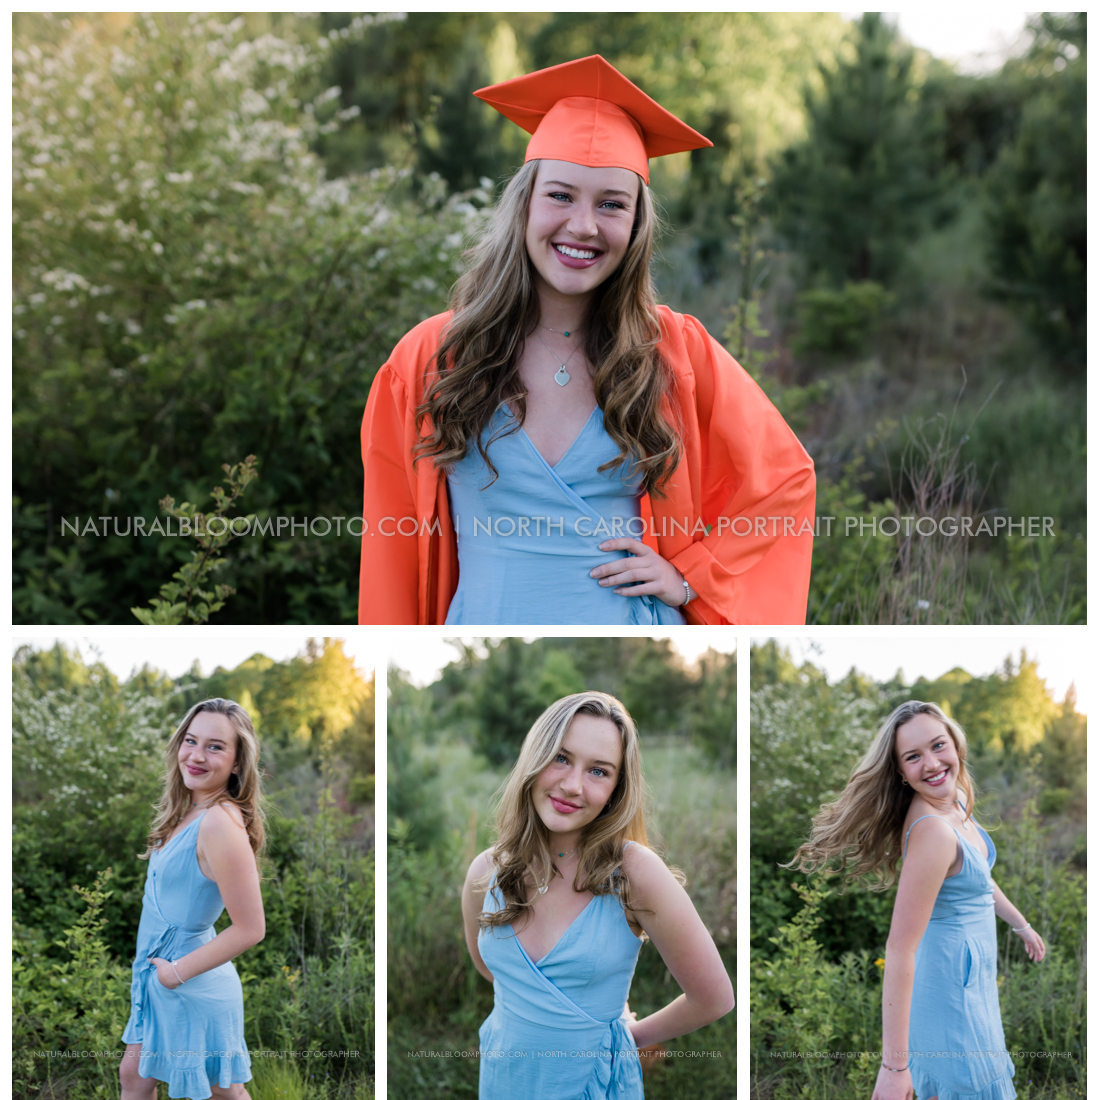 Cap and gown grad pictures
